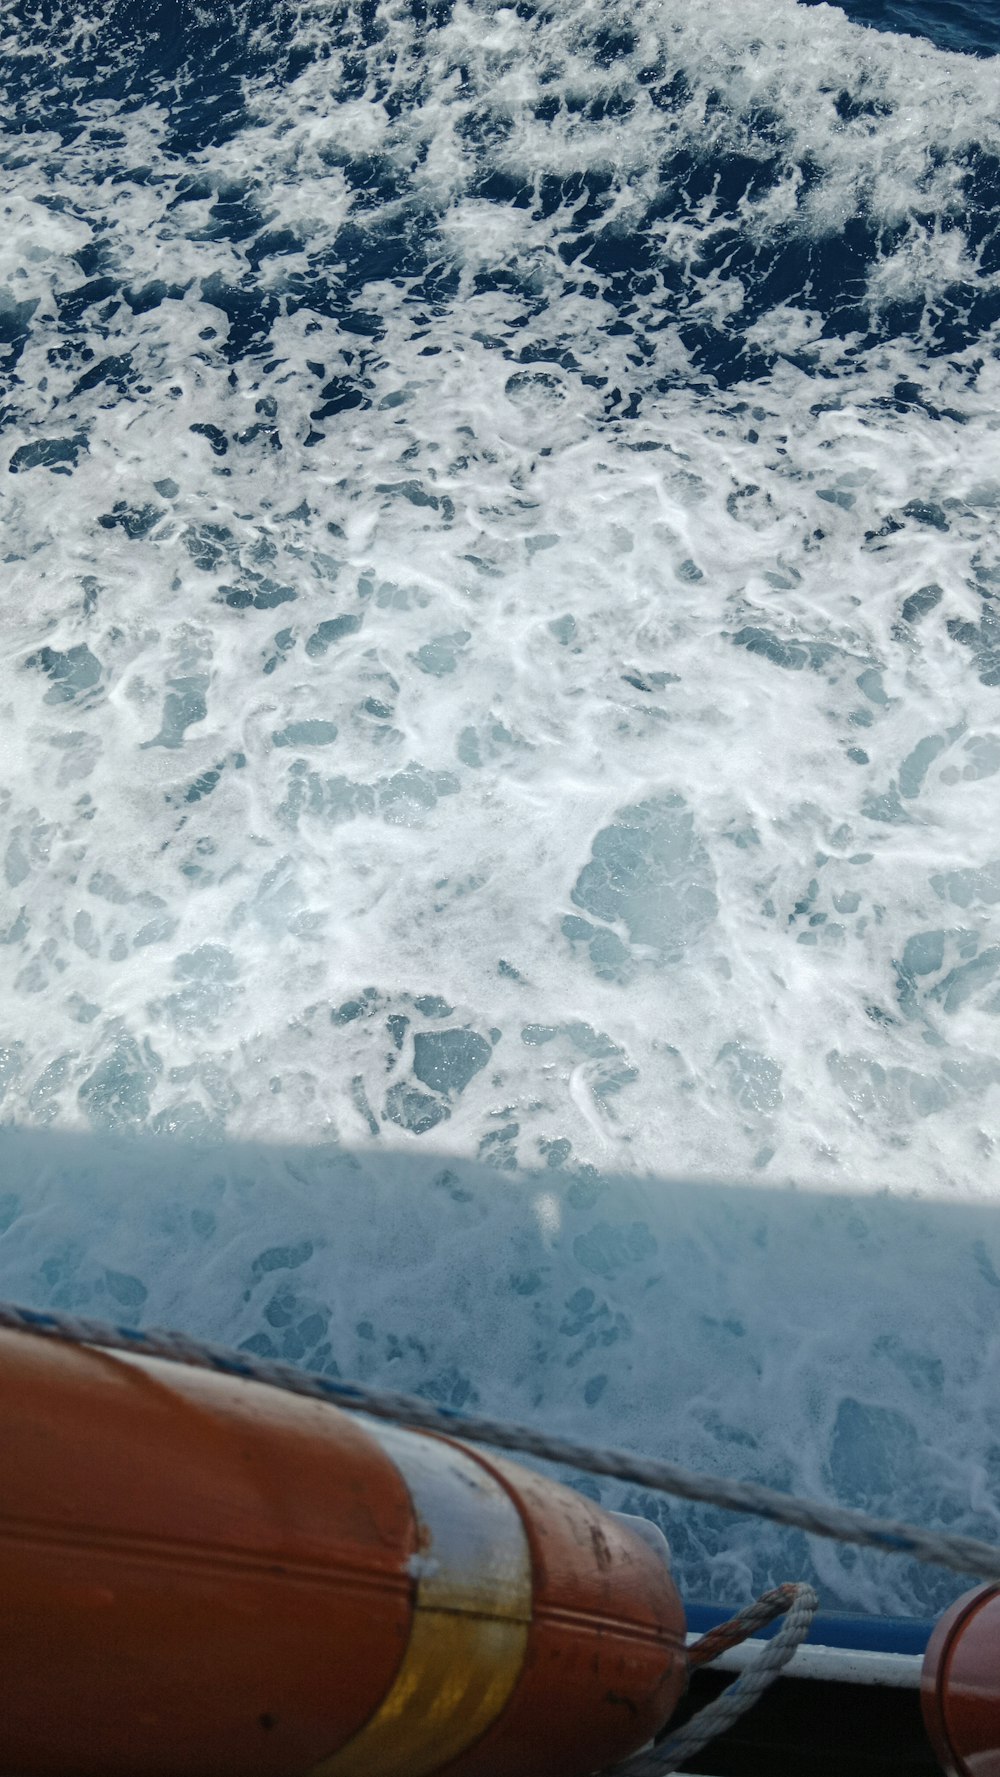 a view of the back of a boat in the water